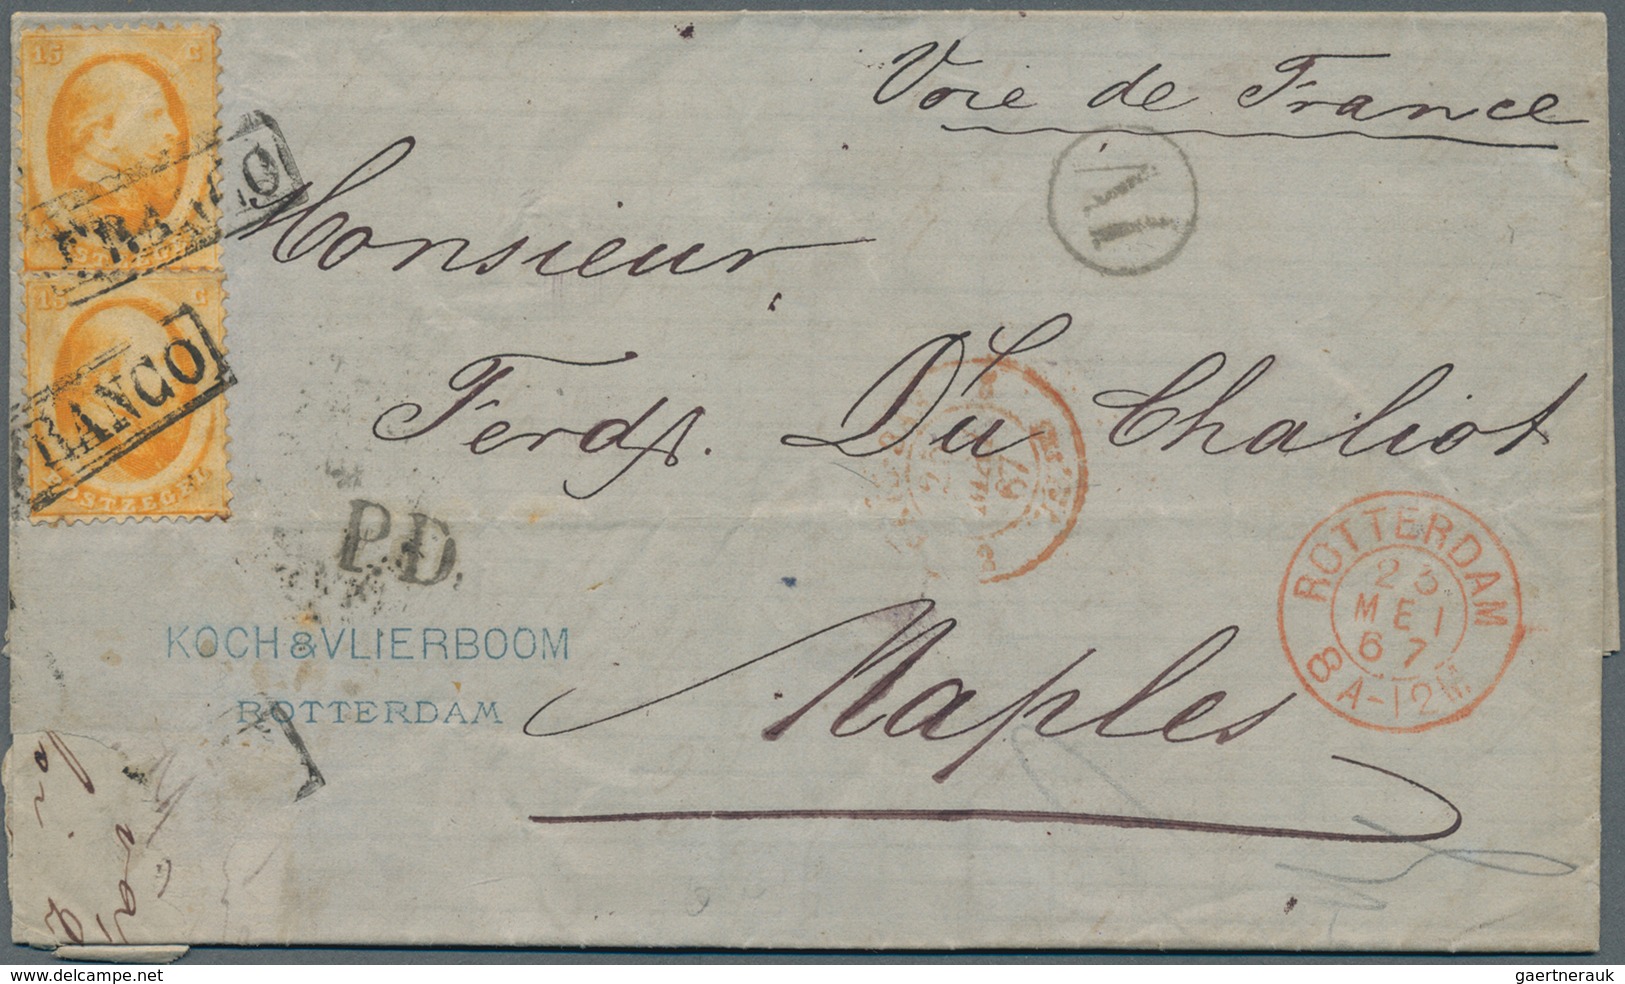 Alle Welt: 1858/1980 (ca.), interesting lot of approx. 280 mostly classic covers or stationeries, in